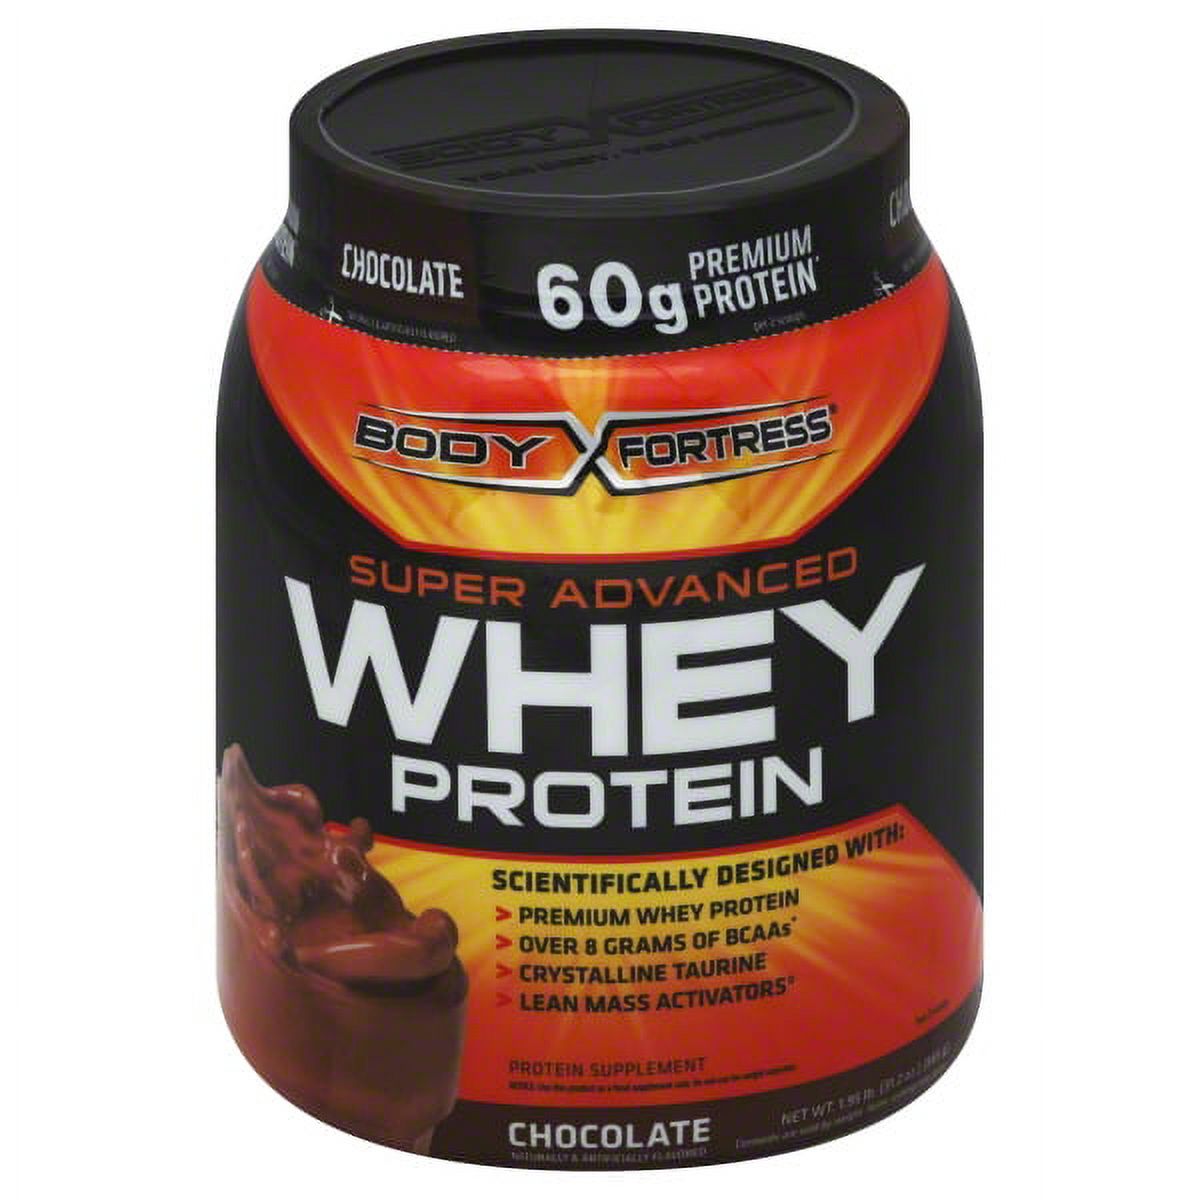 Body Fortress Super Advanced Whey Protein Powder, Chocolate, 1.95 lbs. - image 1 of 8